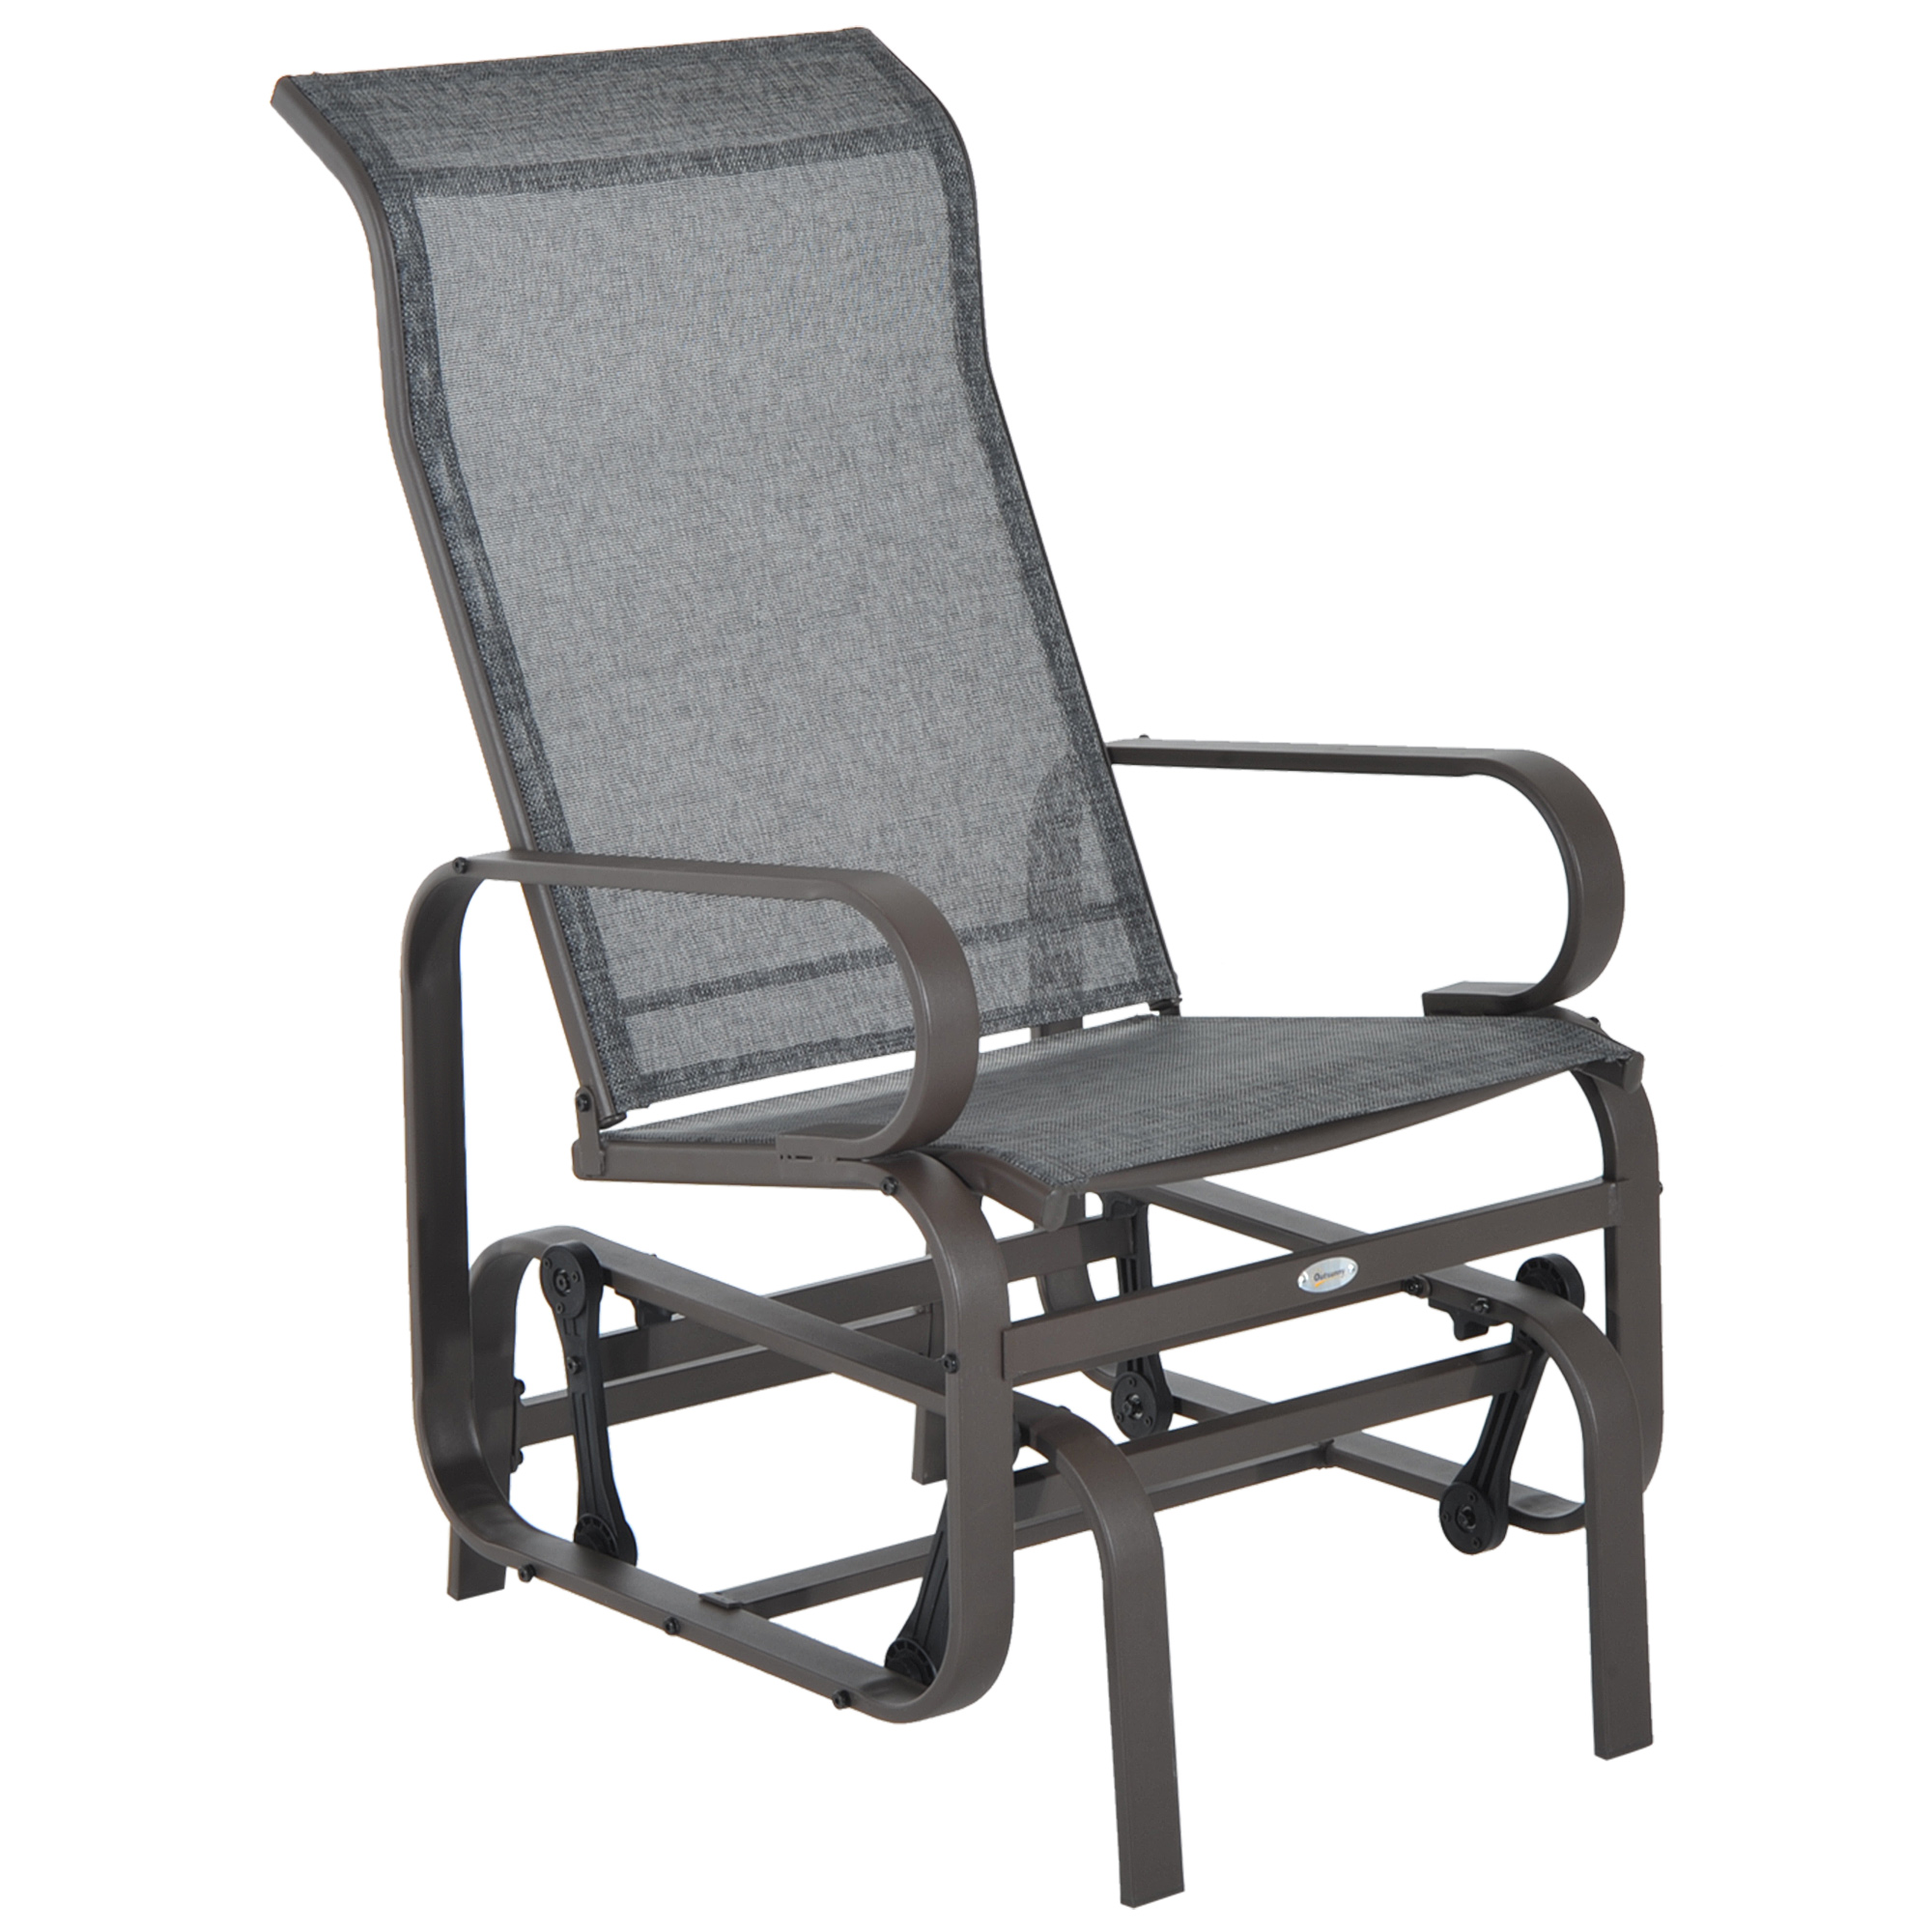 Outsunny Gliding Lounger Chair with Lightweight Construction, Gray - image 1 of 6